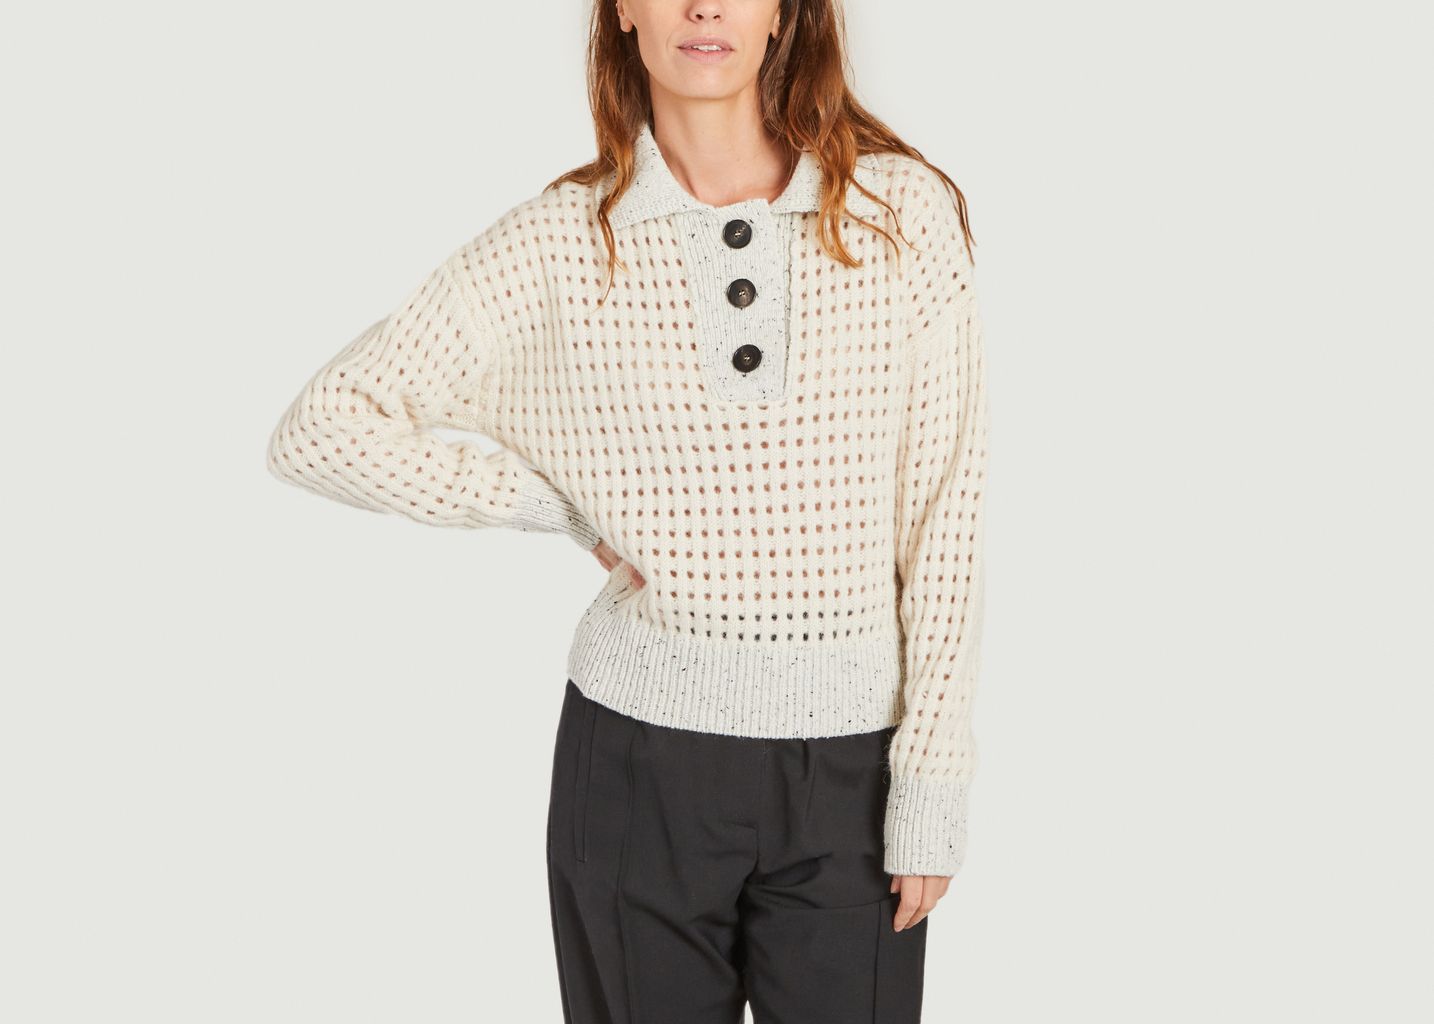 Limetta openwork sweater with buttoned collar - TELA